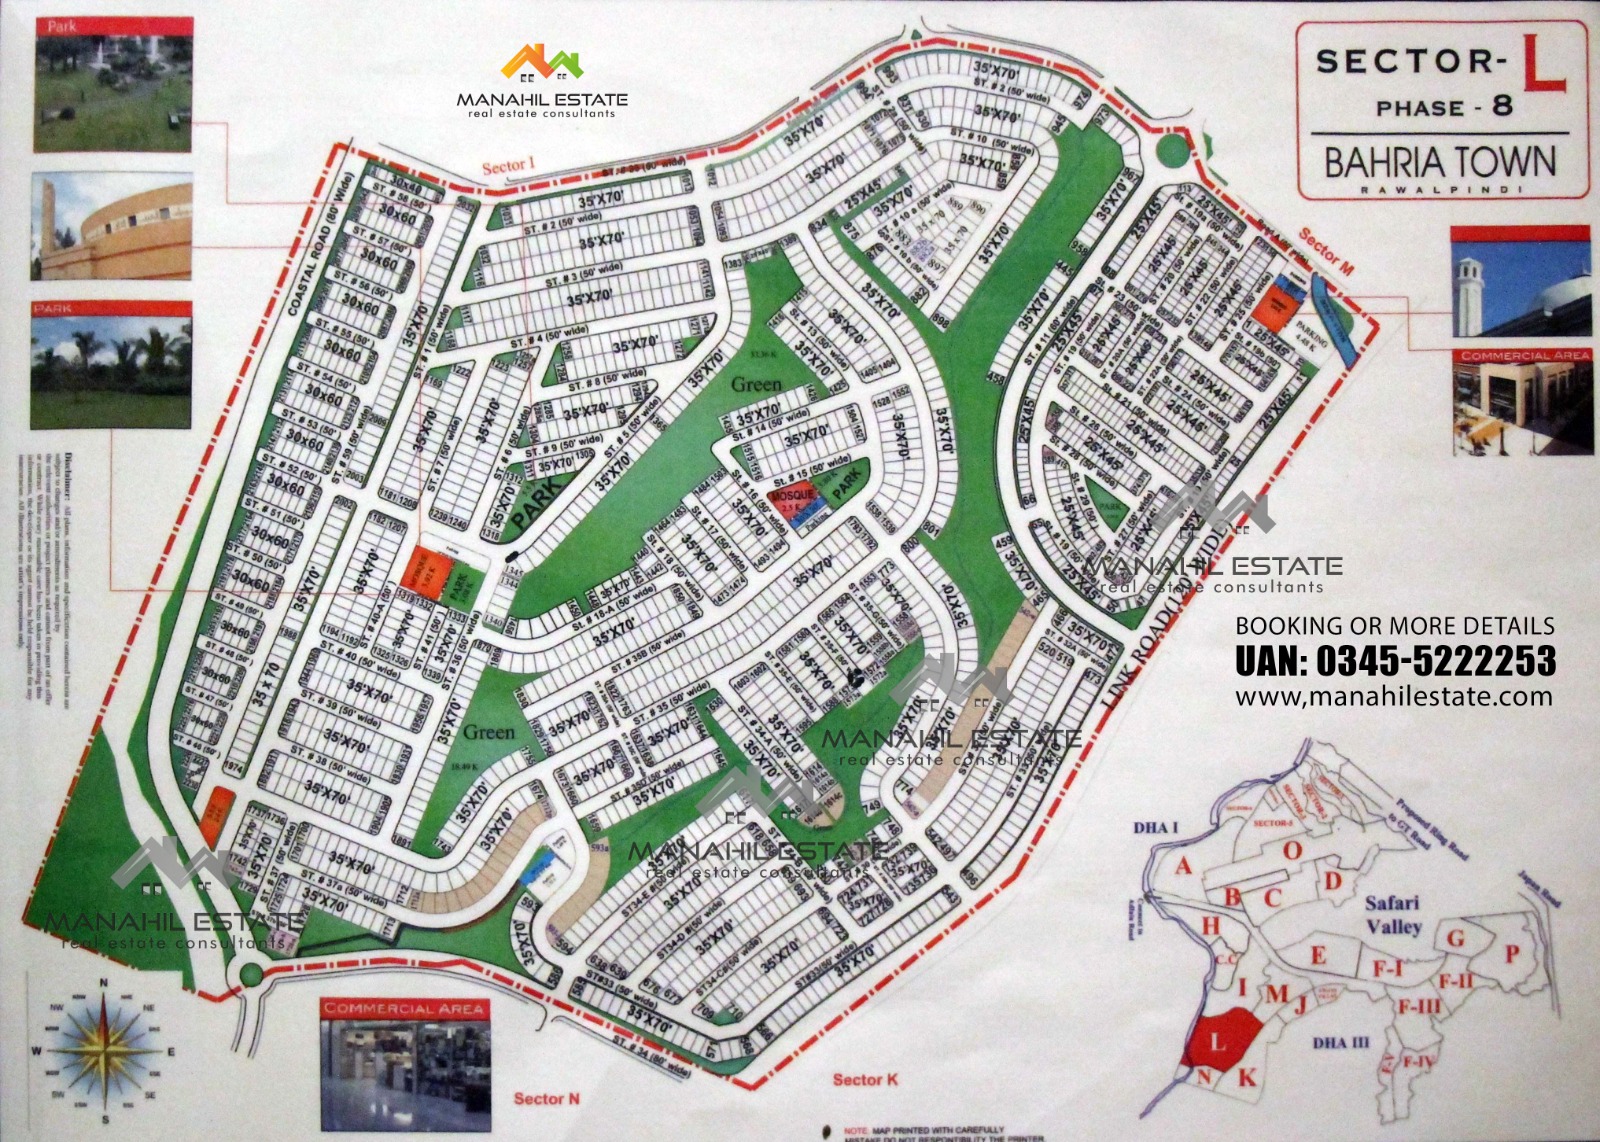 Sector L Phase 8 Bahria Town master plan